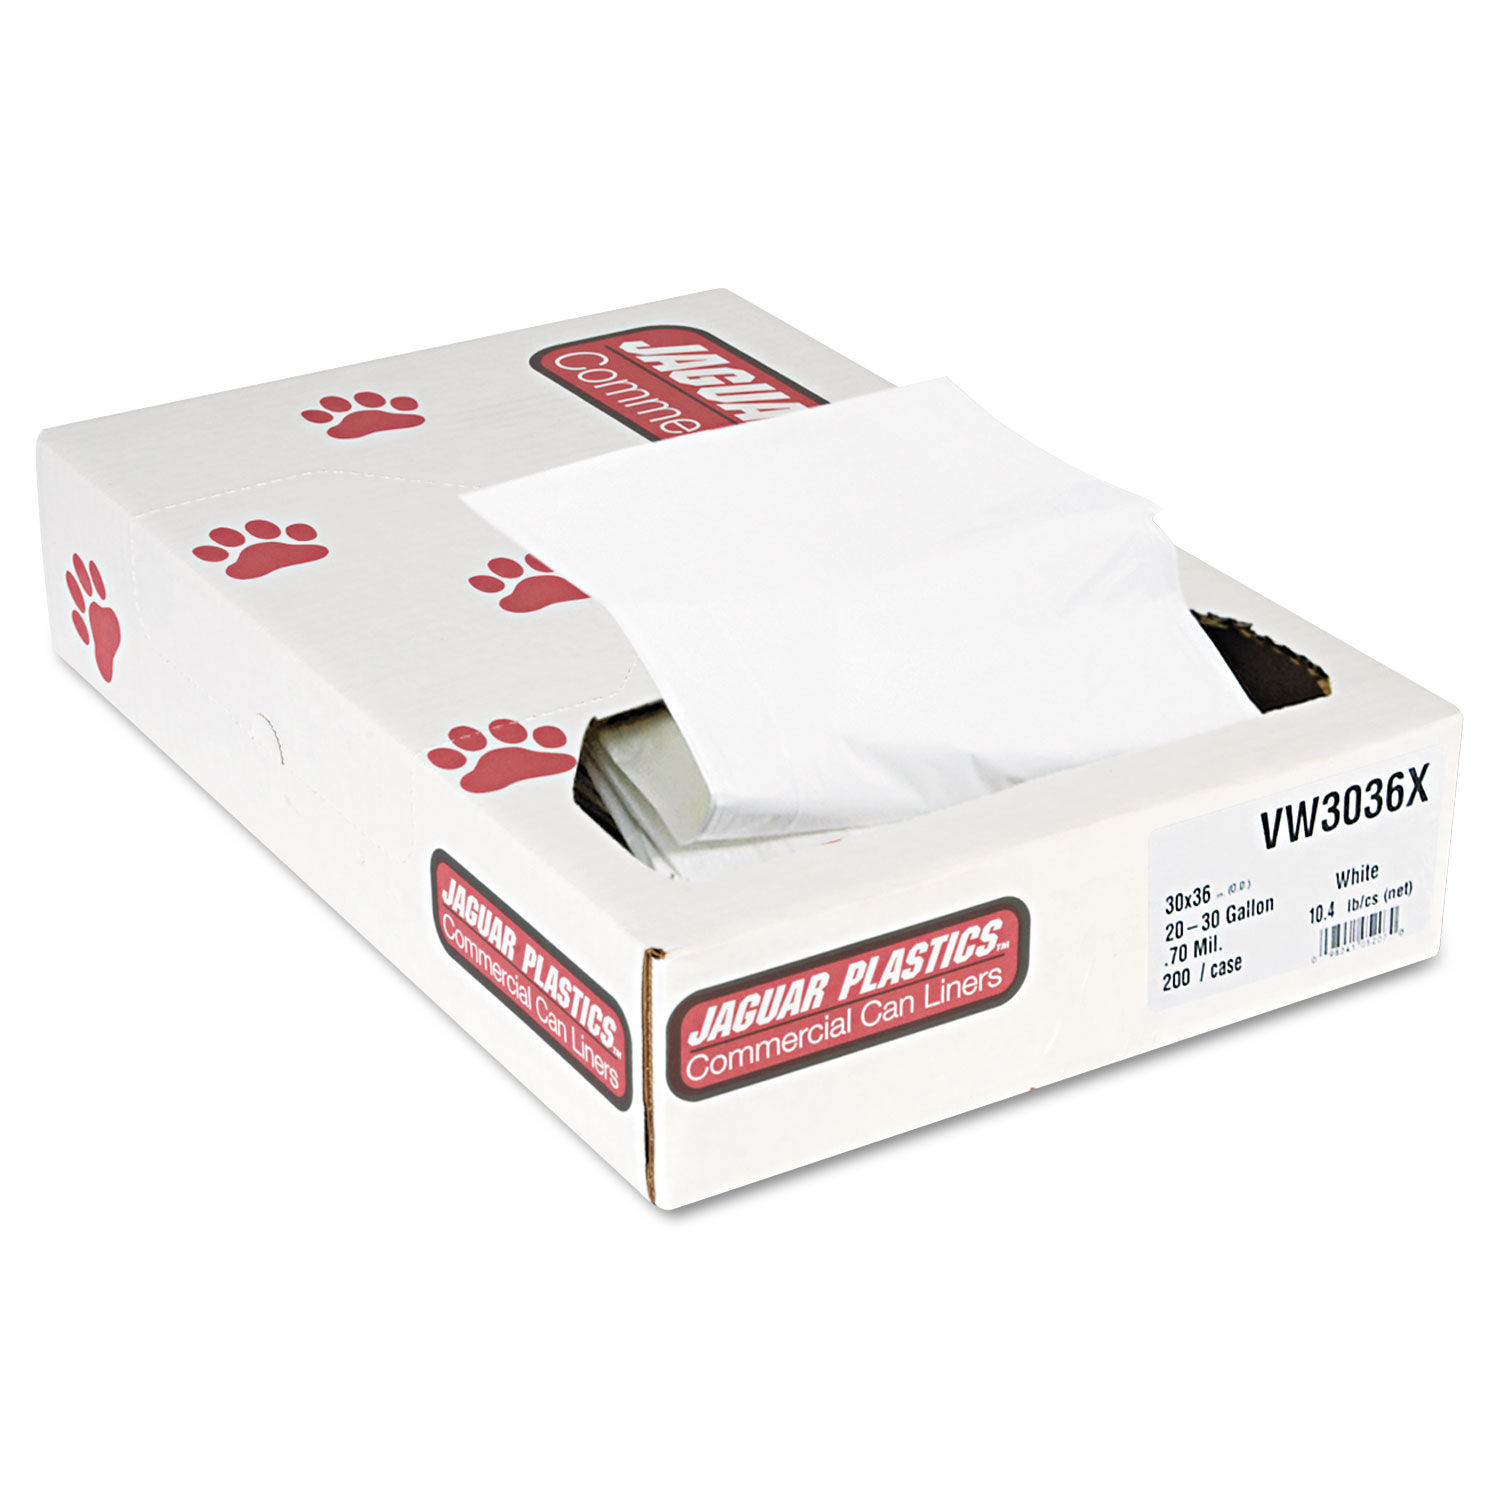 Industrial Strength Low-Density Commercial Can Liners 30 gal, 0.7 mil, 30" x 36", White, 200/Carton